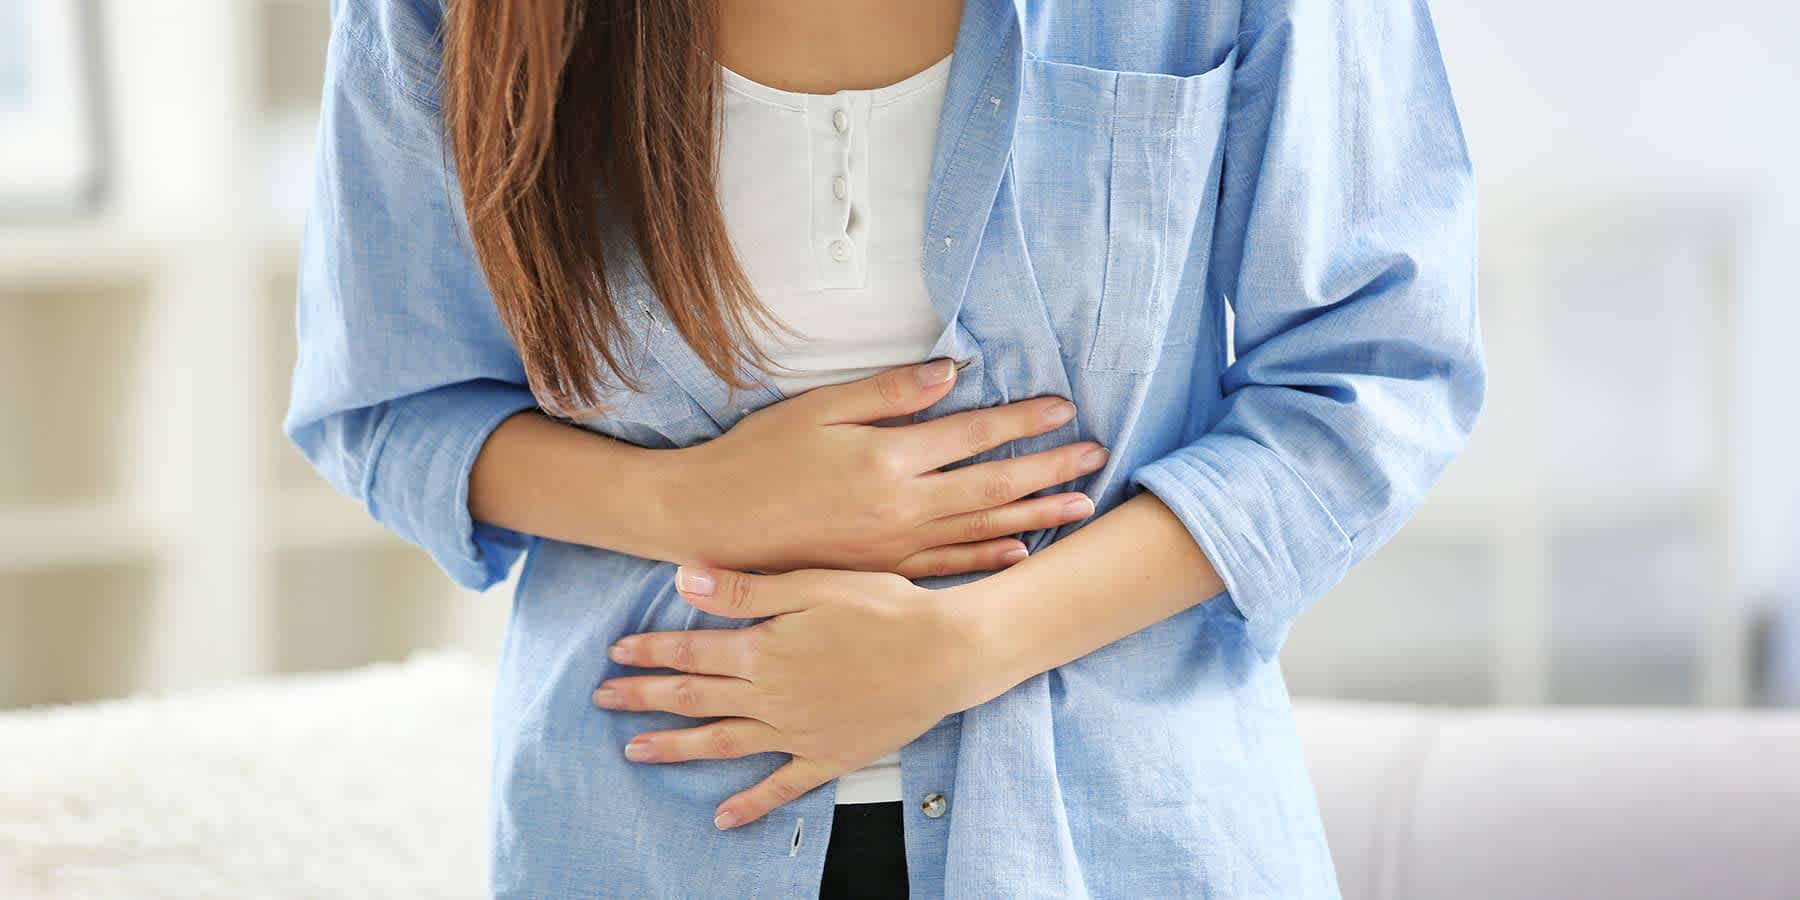 Woman with hands over abdomen experiencing symptoms and wondering if a UTI can cause bleeding